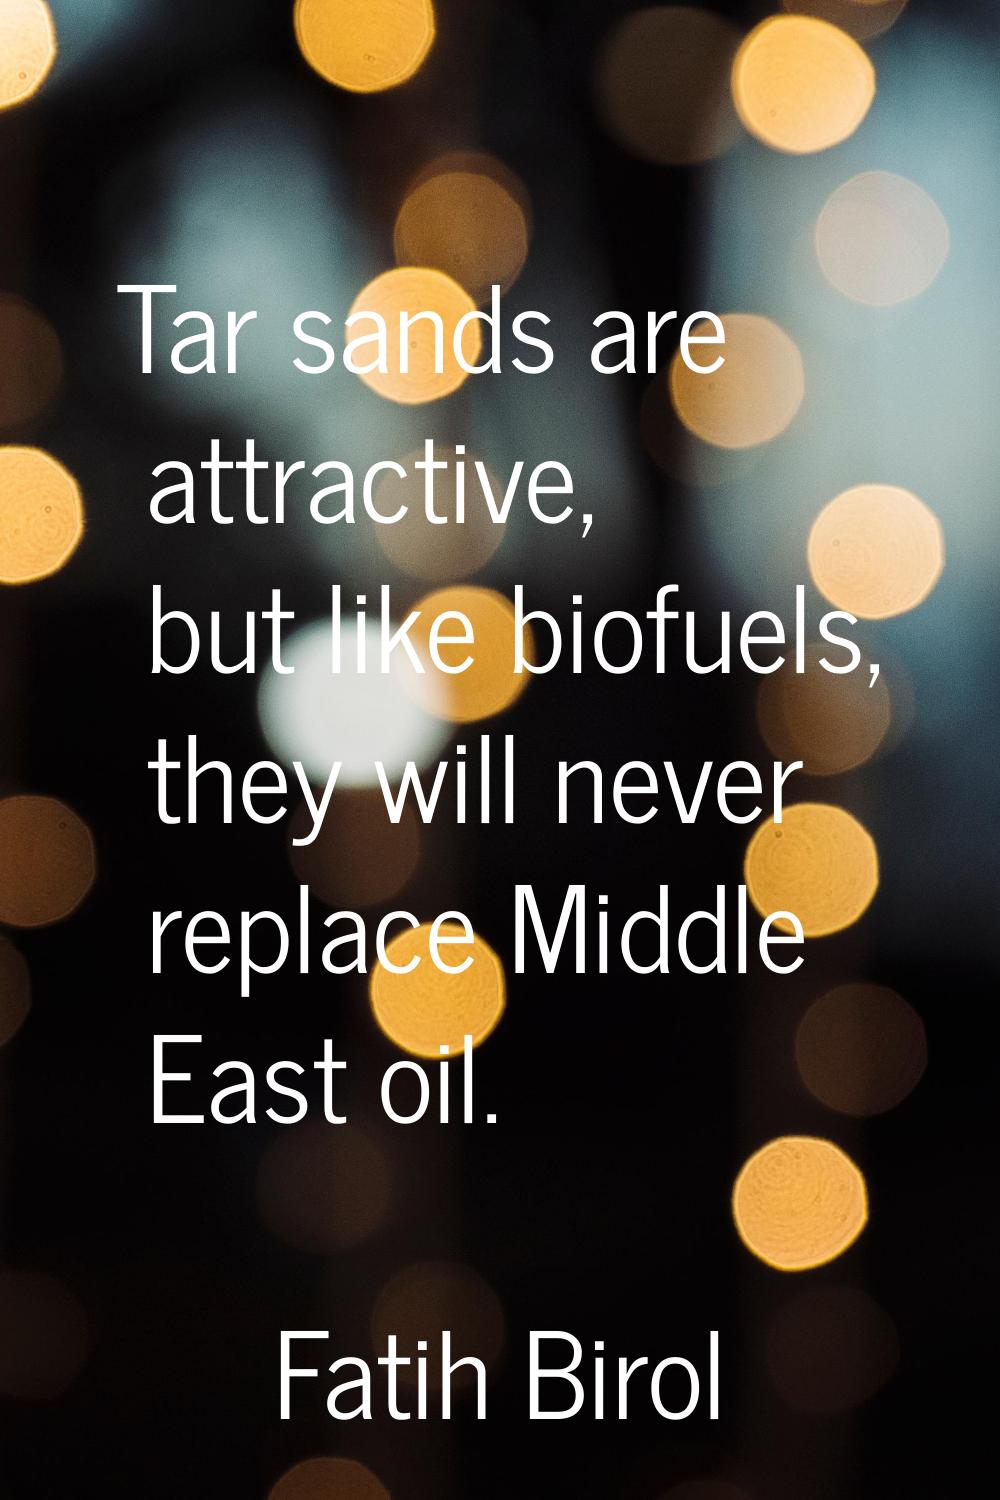 Tar sands are attractive, but like biofuels, they will never replace Middle East oil.